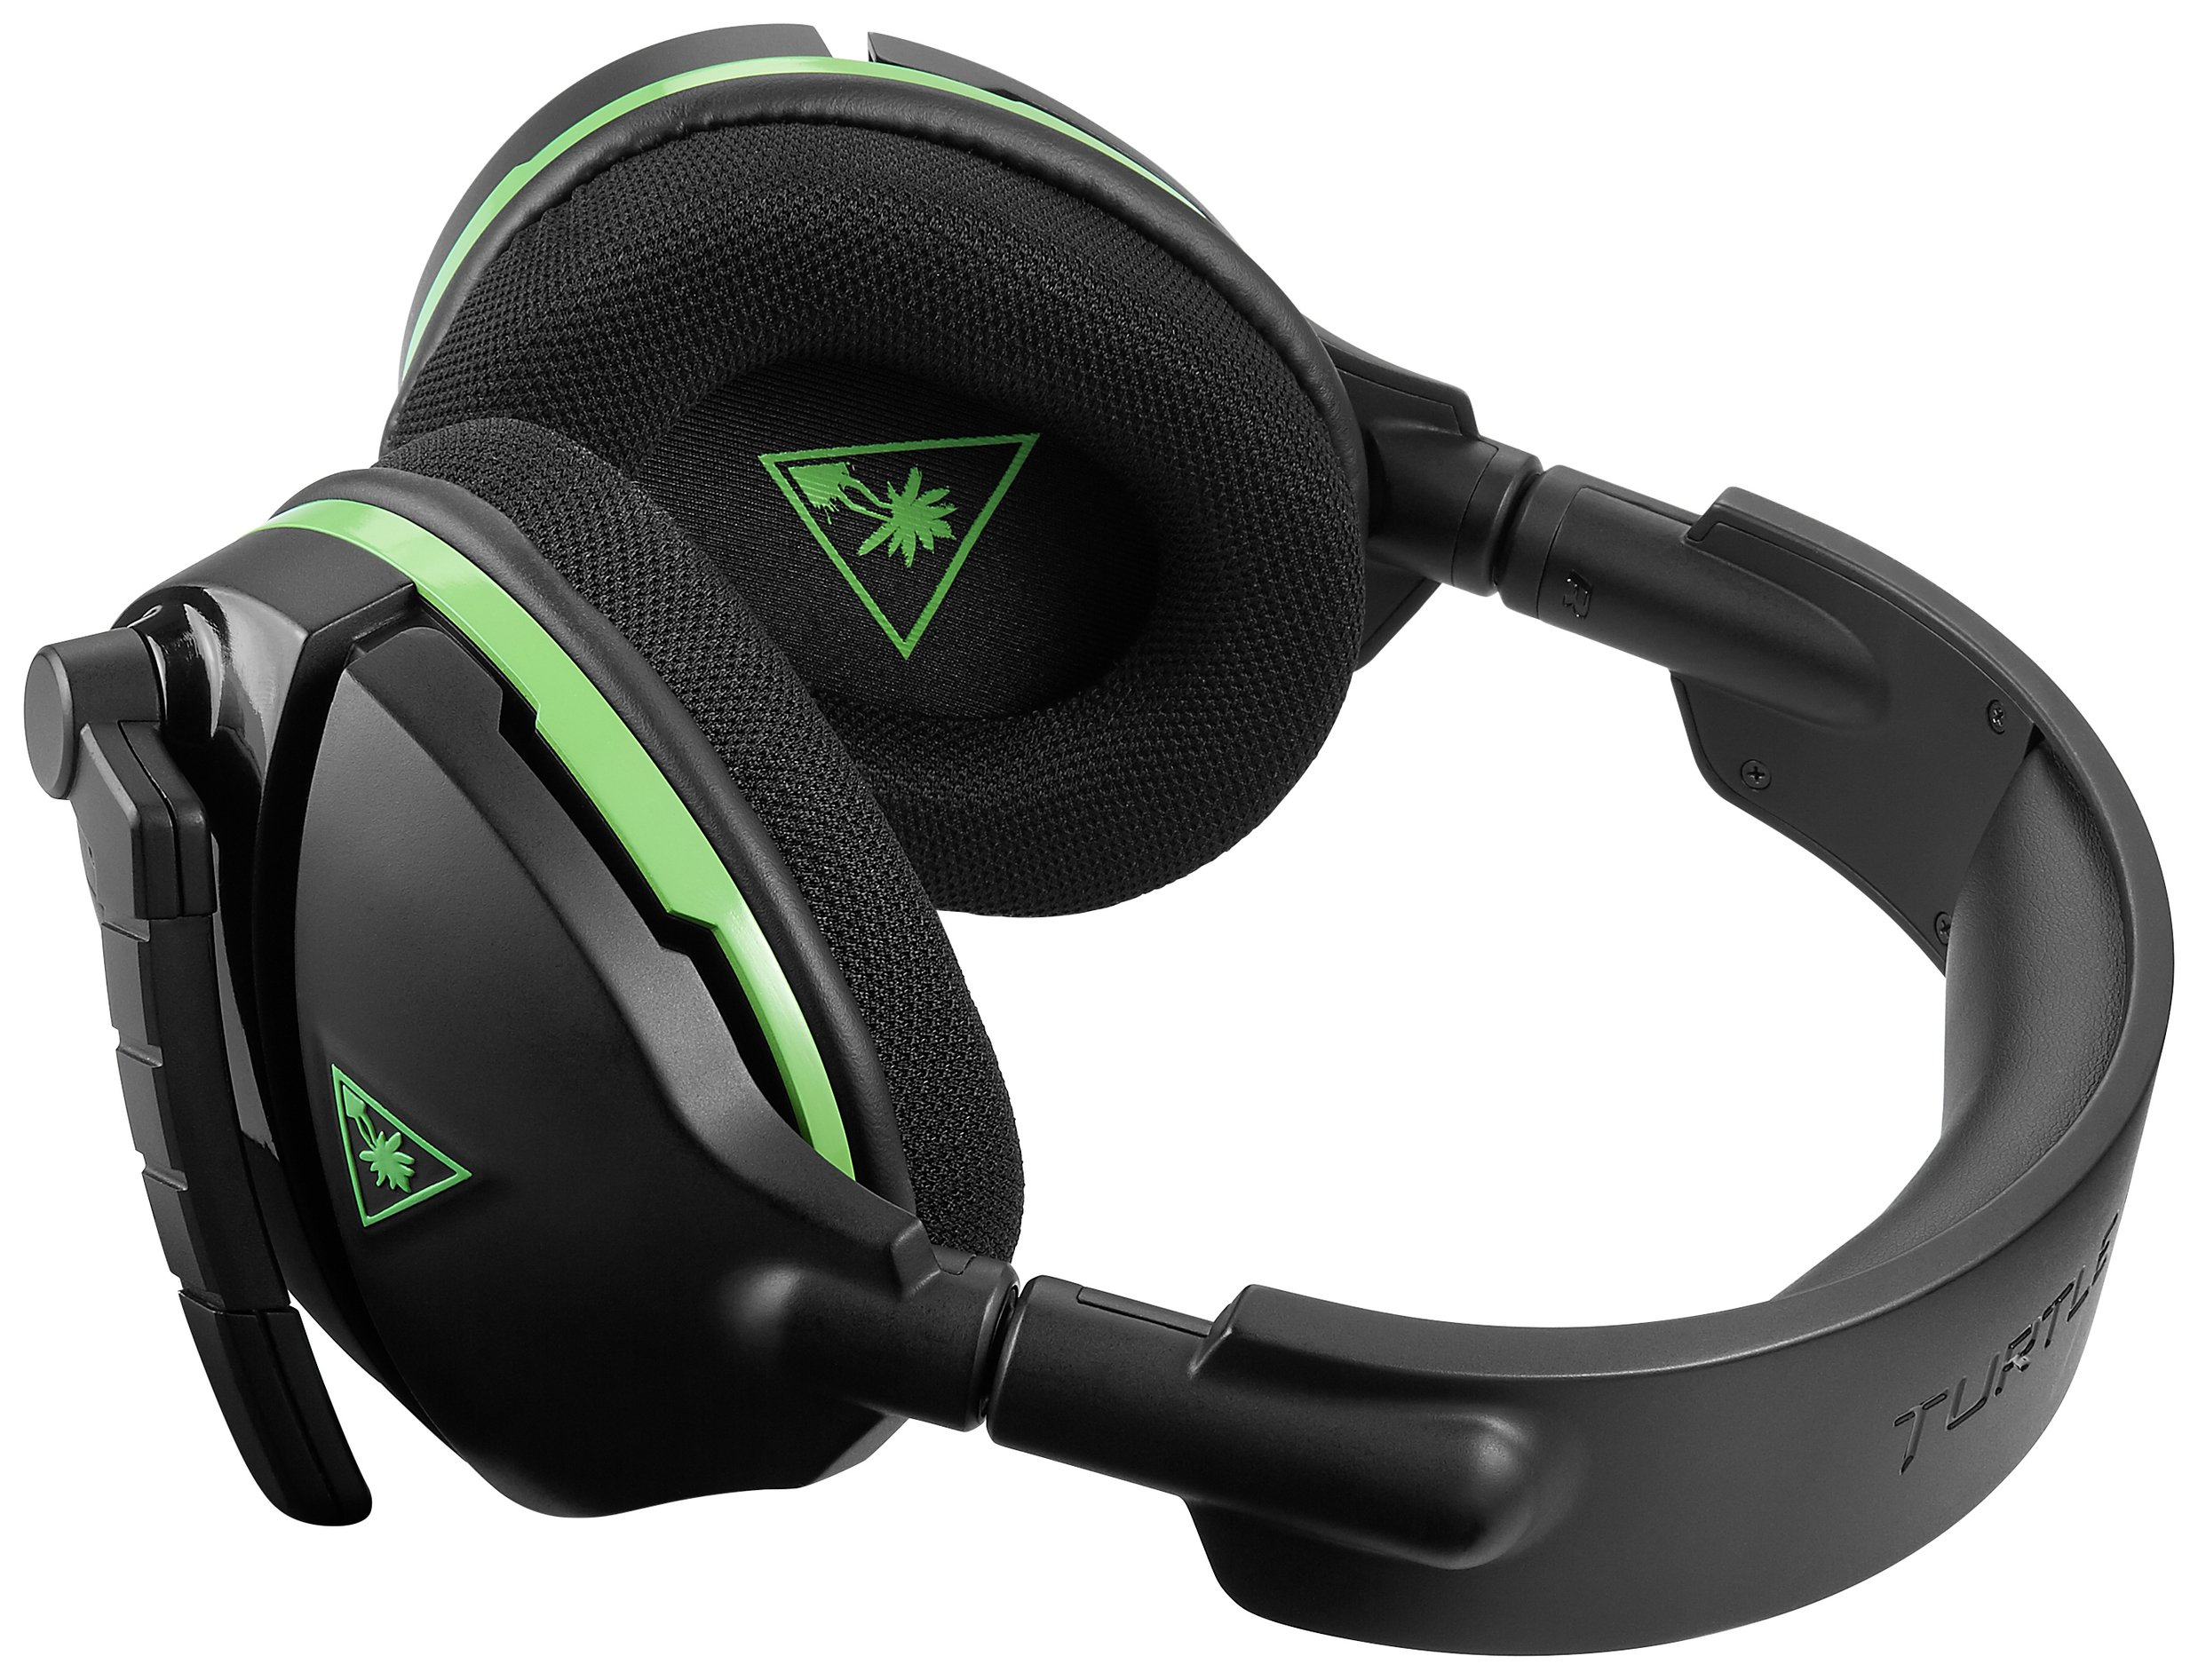 Turtle Beach Stealth Gaming Headset Xbox One Reviews